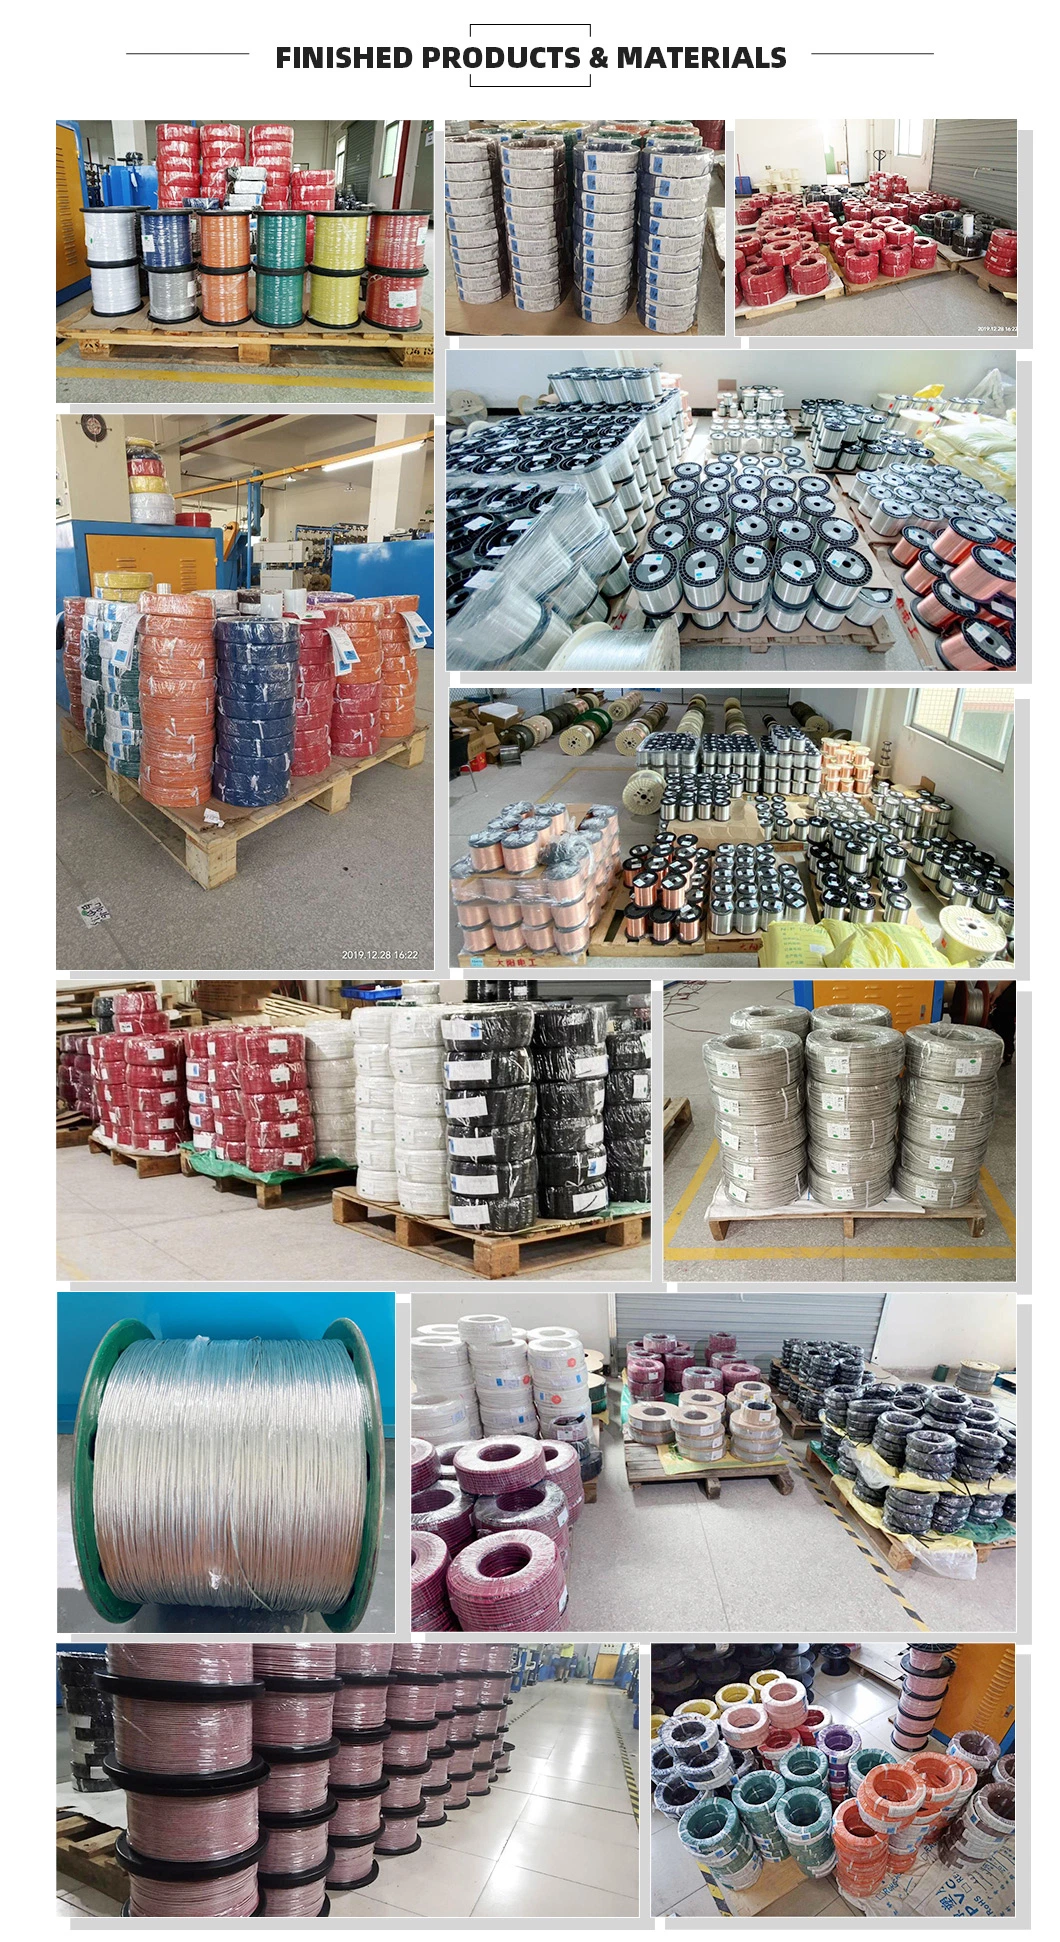 Low Voltage Flexible AVS, Aex, Avx, Avssx Cable Electrical Copper Automotive Hookup Wire Cable with Japanese Standard